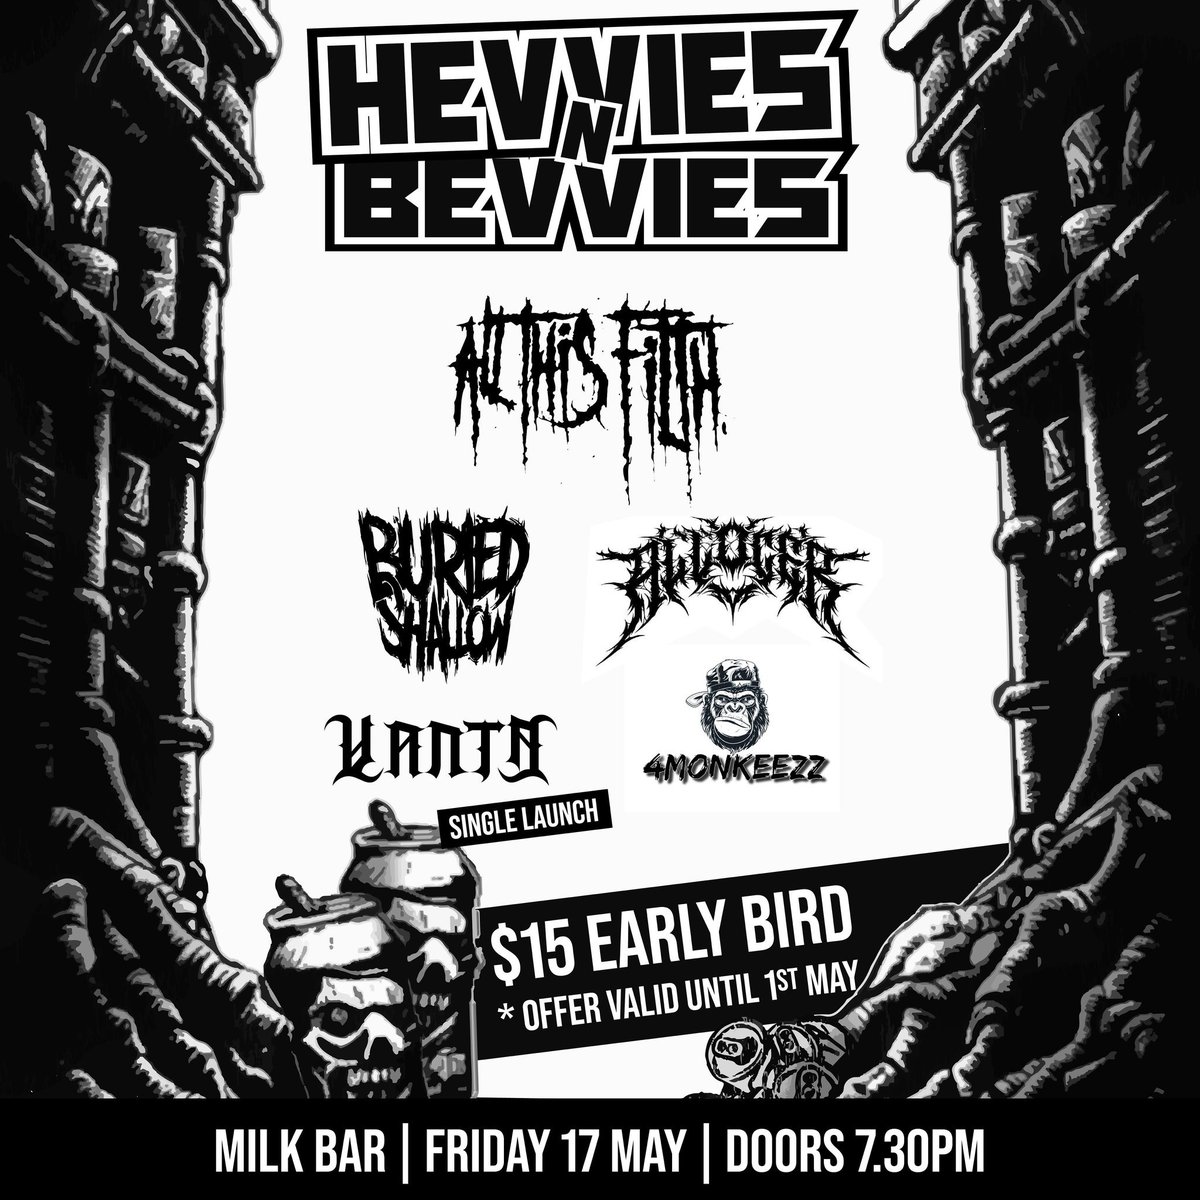 Announcing our next show on 17 May - HEVVIES 'N' BEVVIES alongside Buried Shallow, Allocer, VANTA & 4Monkeezz at the Milk Bar. Tickets on sale now from Oztix: bit.ly/49MPKTx